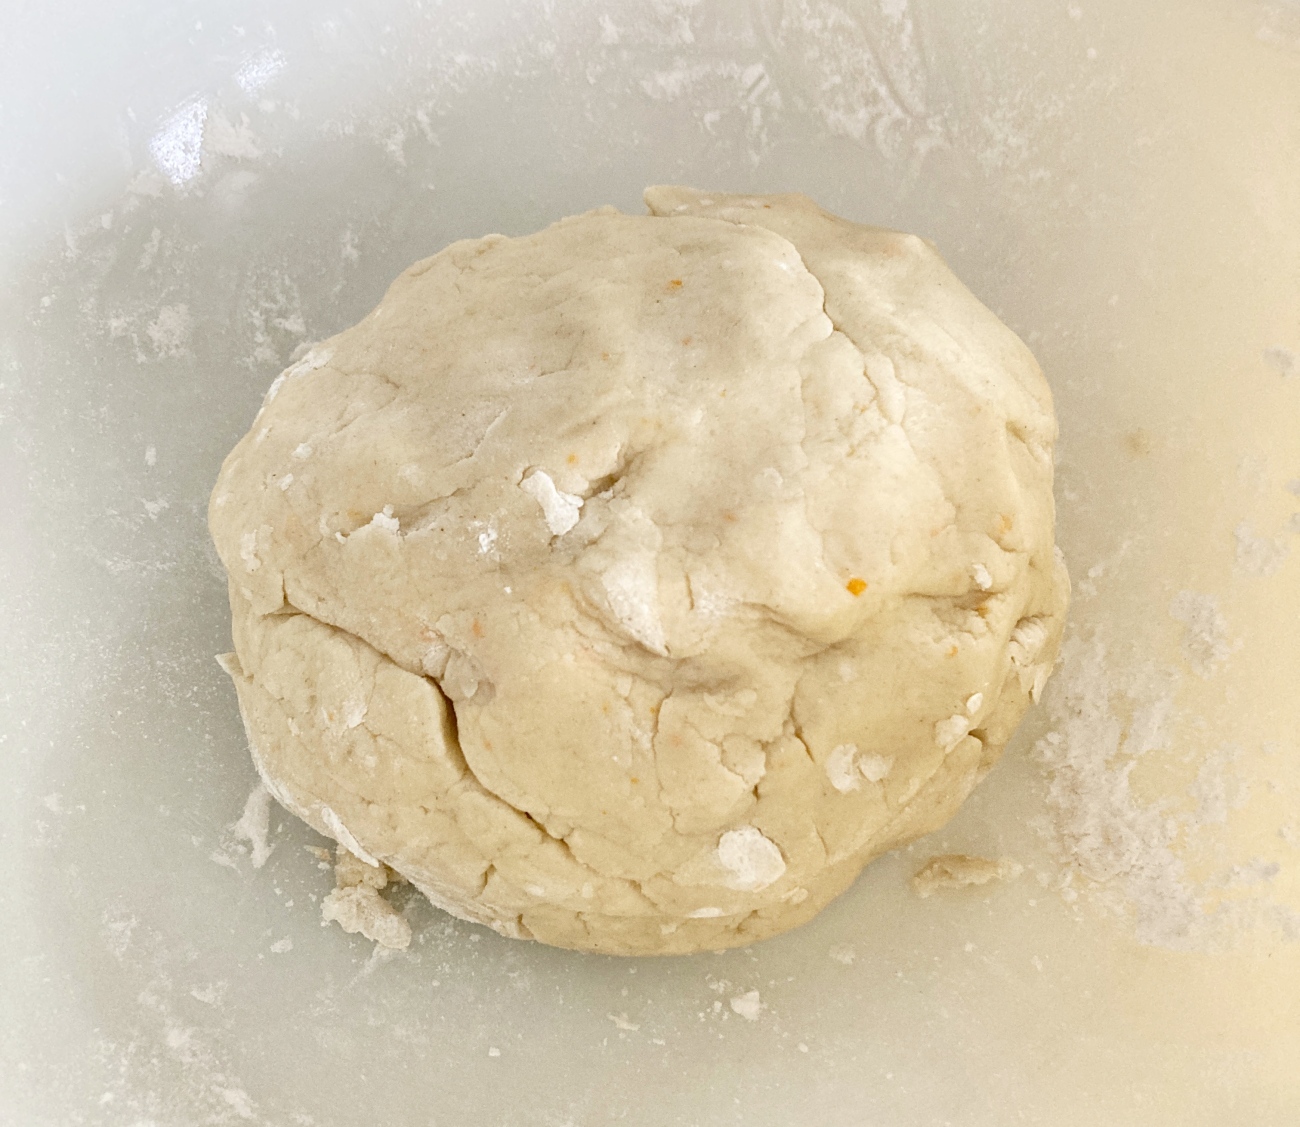 Combine dough ingredients in a food processor until dough just forms into a ball. Only add full amount of water if dough is too dry. Roll into a ball and cover with plastic wrap.